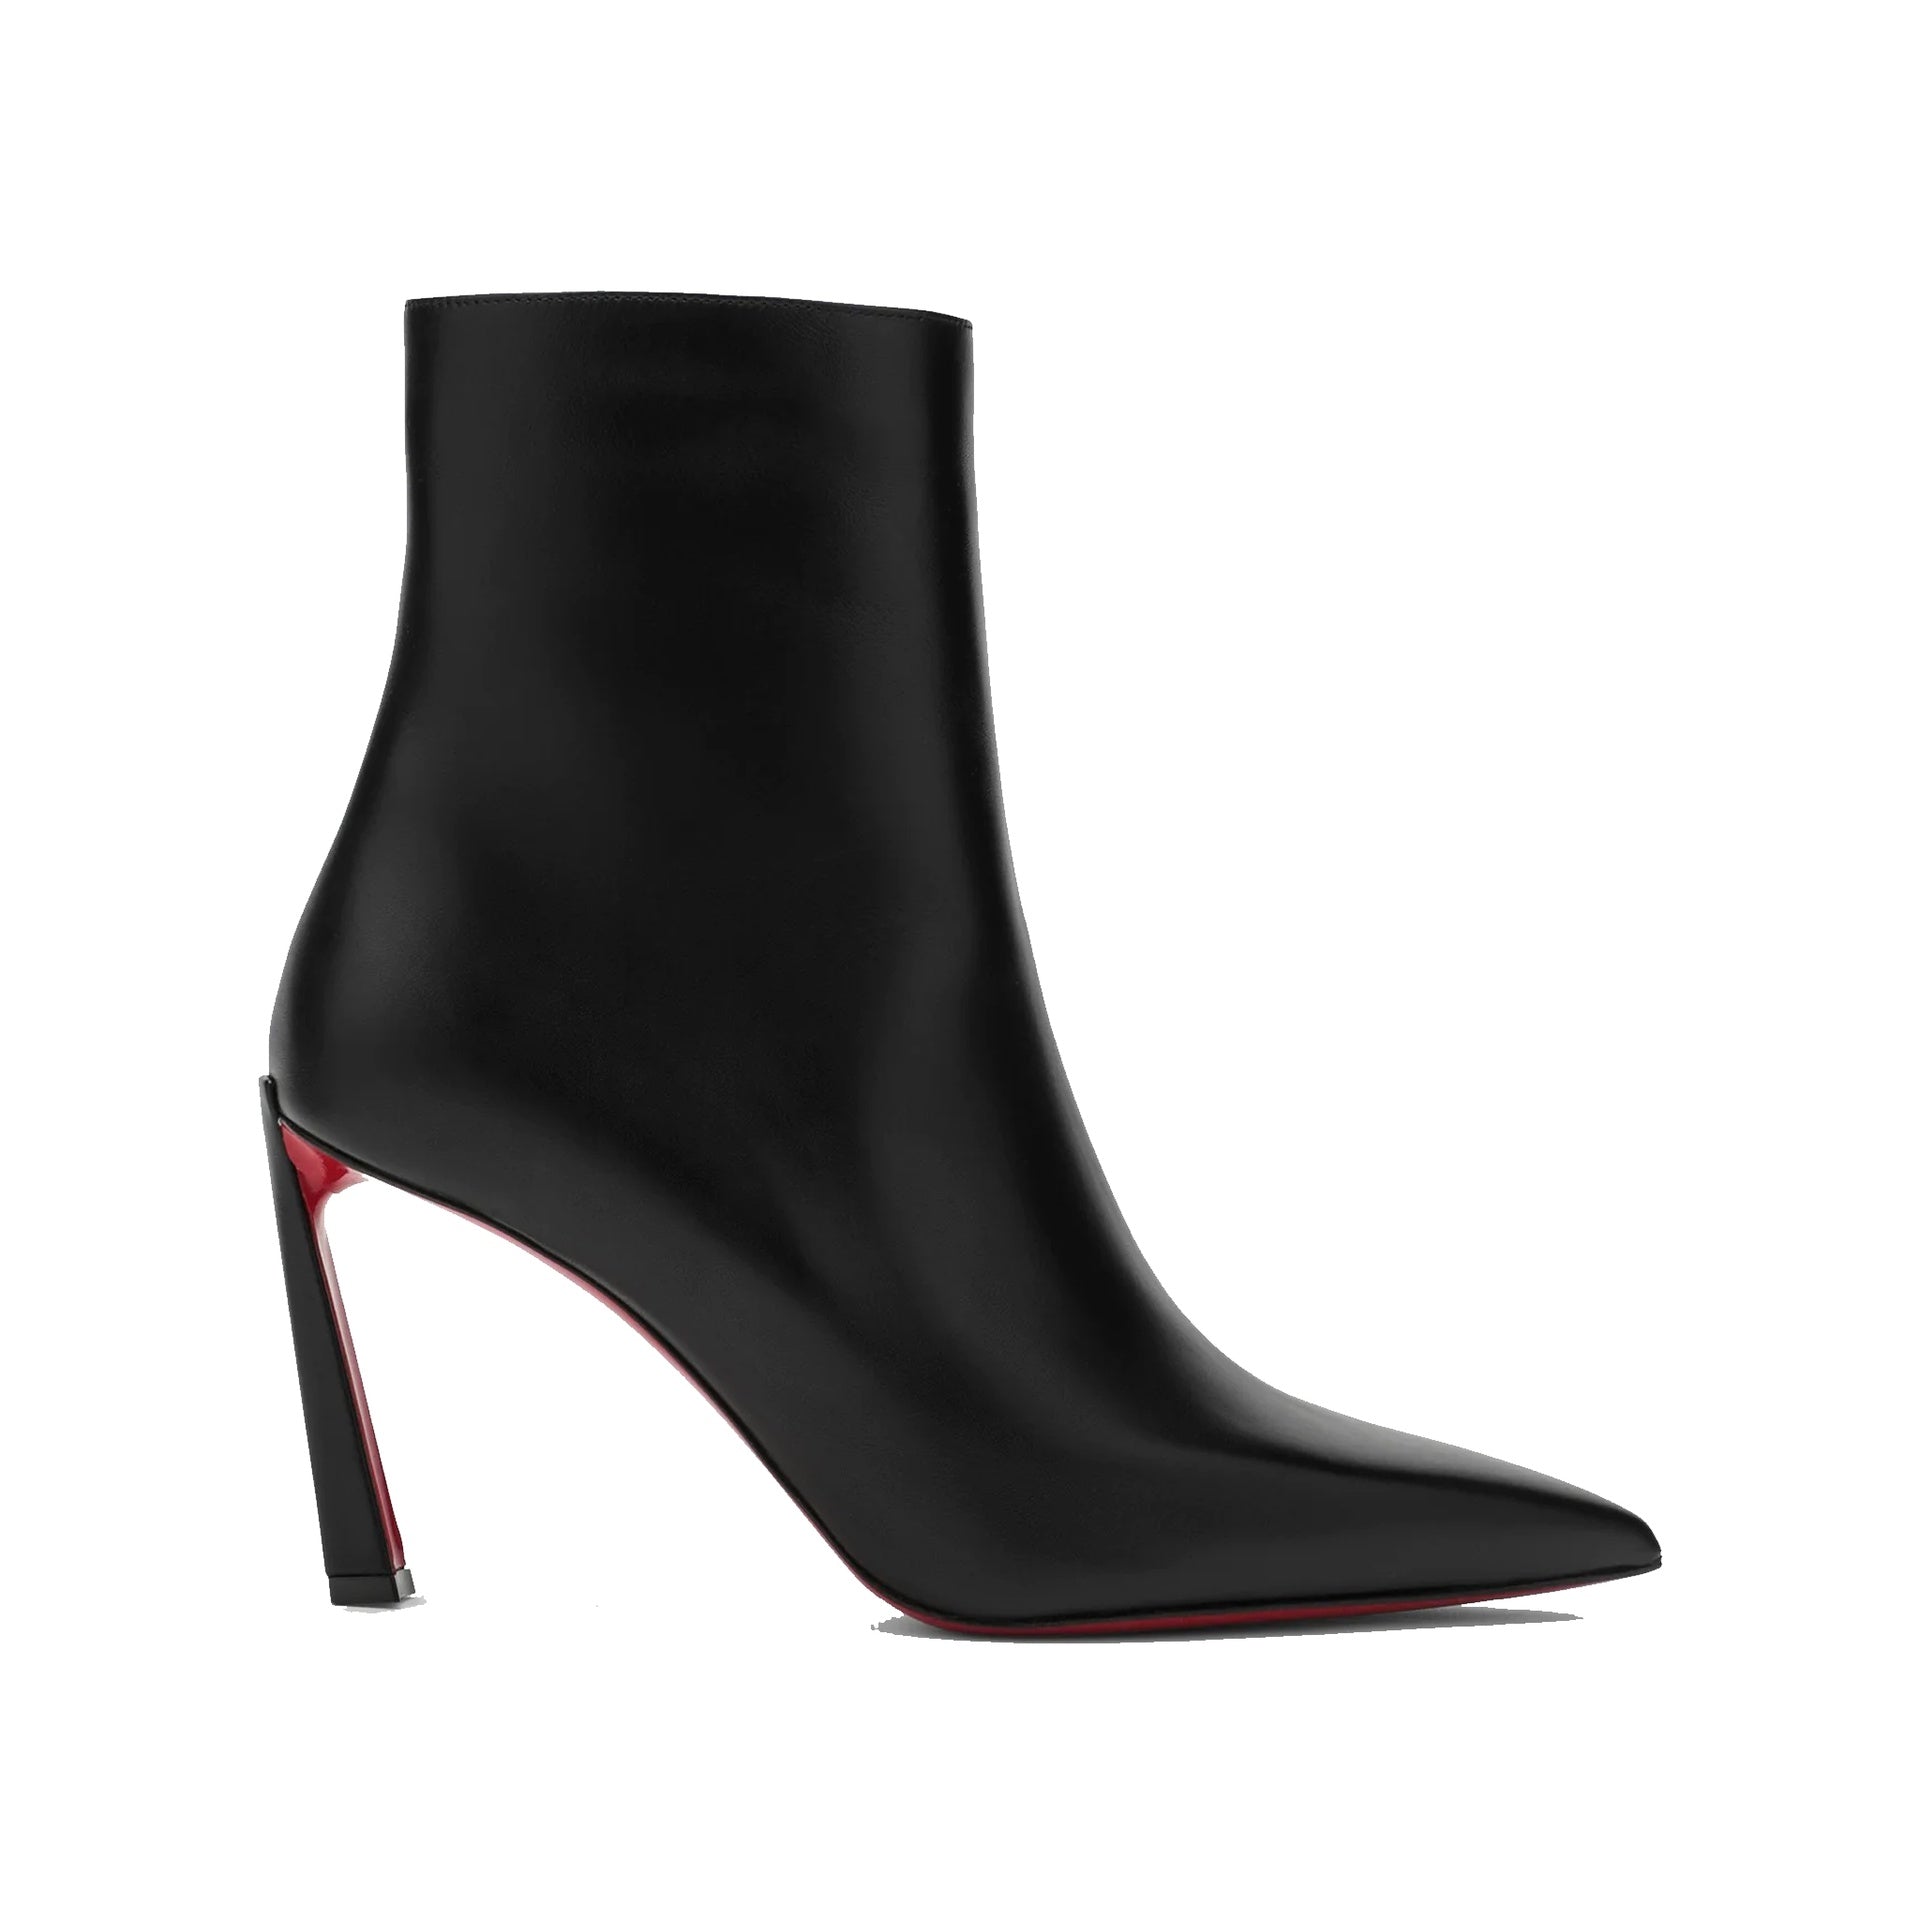 CHRISTIAN-LOUBOUTIN-OUTLET-SALE-Christian-Louboutin-Cora-85-Boots-Stiefel-Stiefeletten-BLACK-36_5-ARCHIVE-COLLECTION.jpg